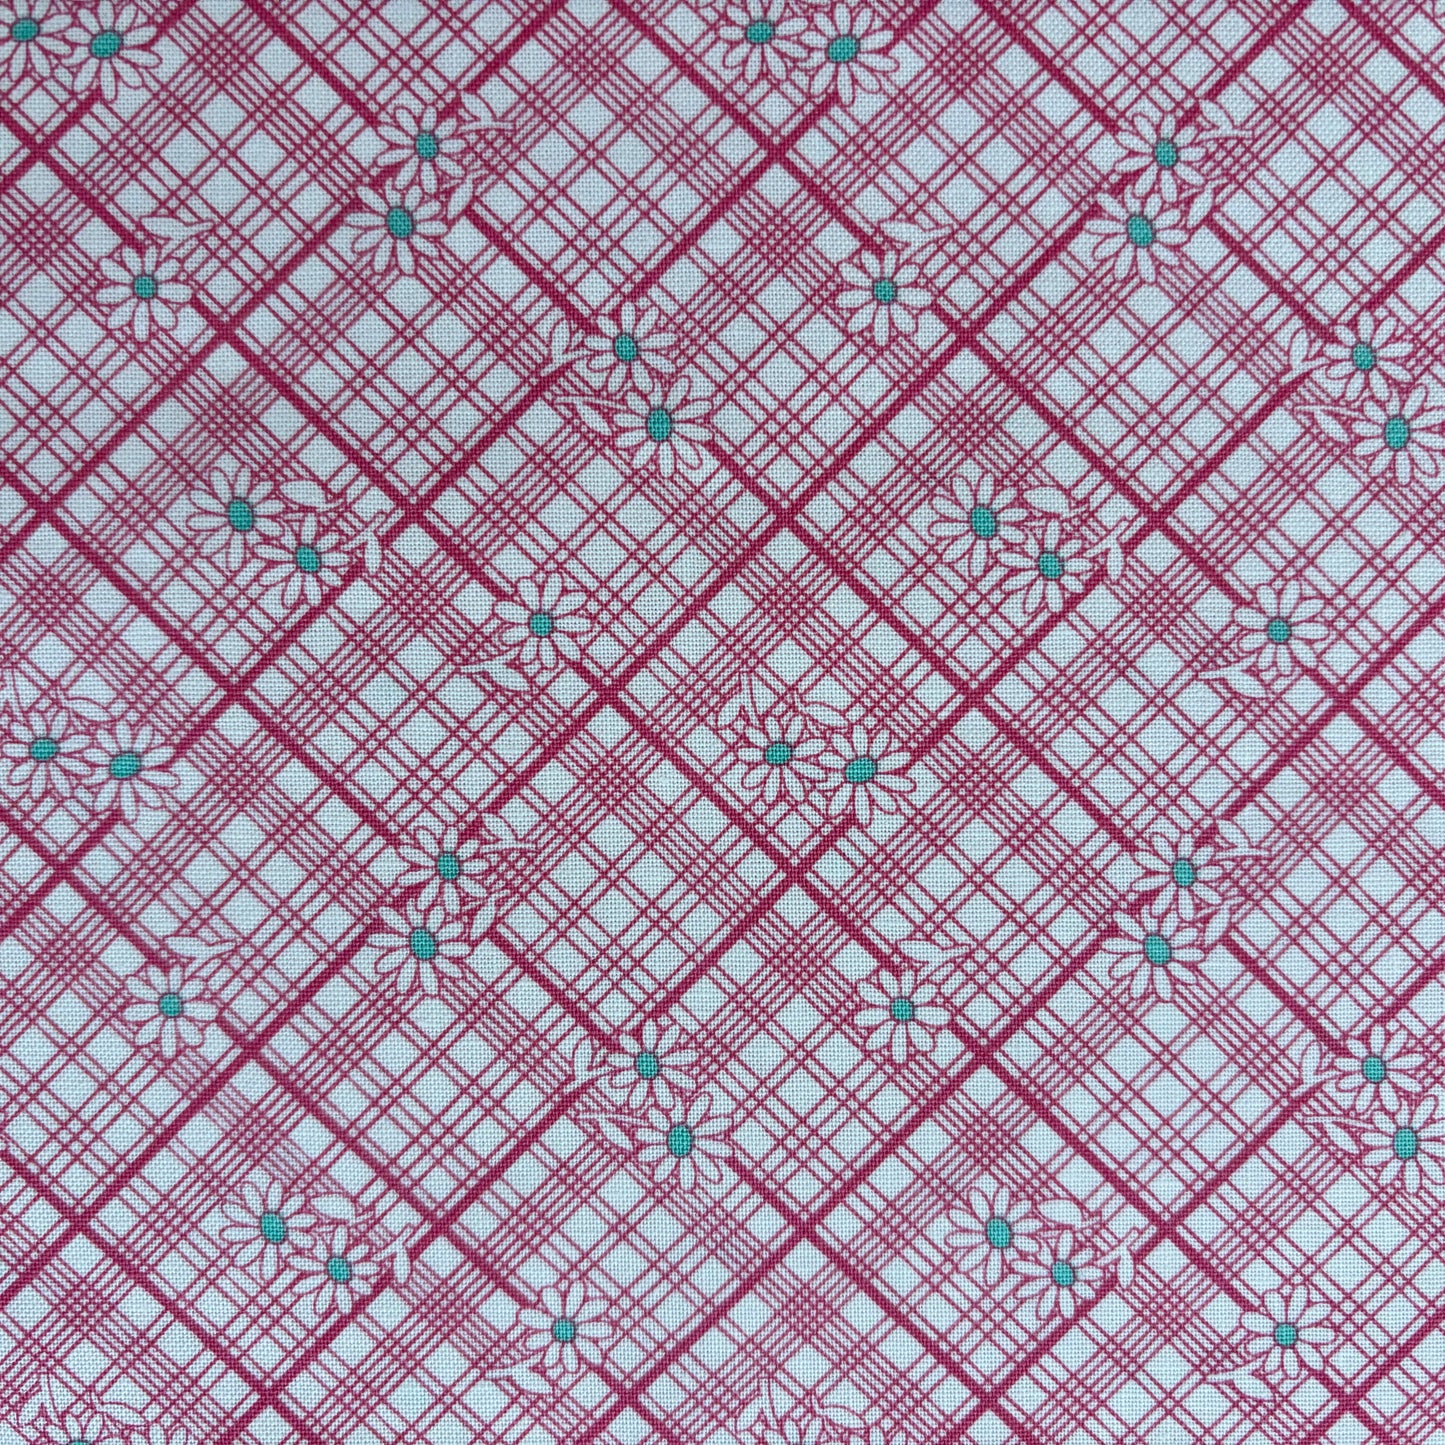 Aunt Grace Calicos by Judie Rothermel for Marcus Fabrics - Lattice Pink